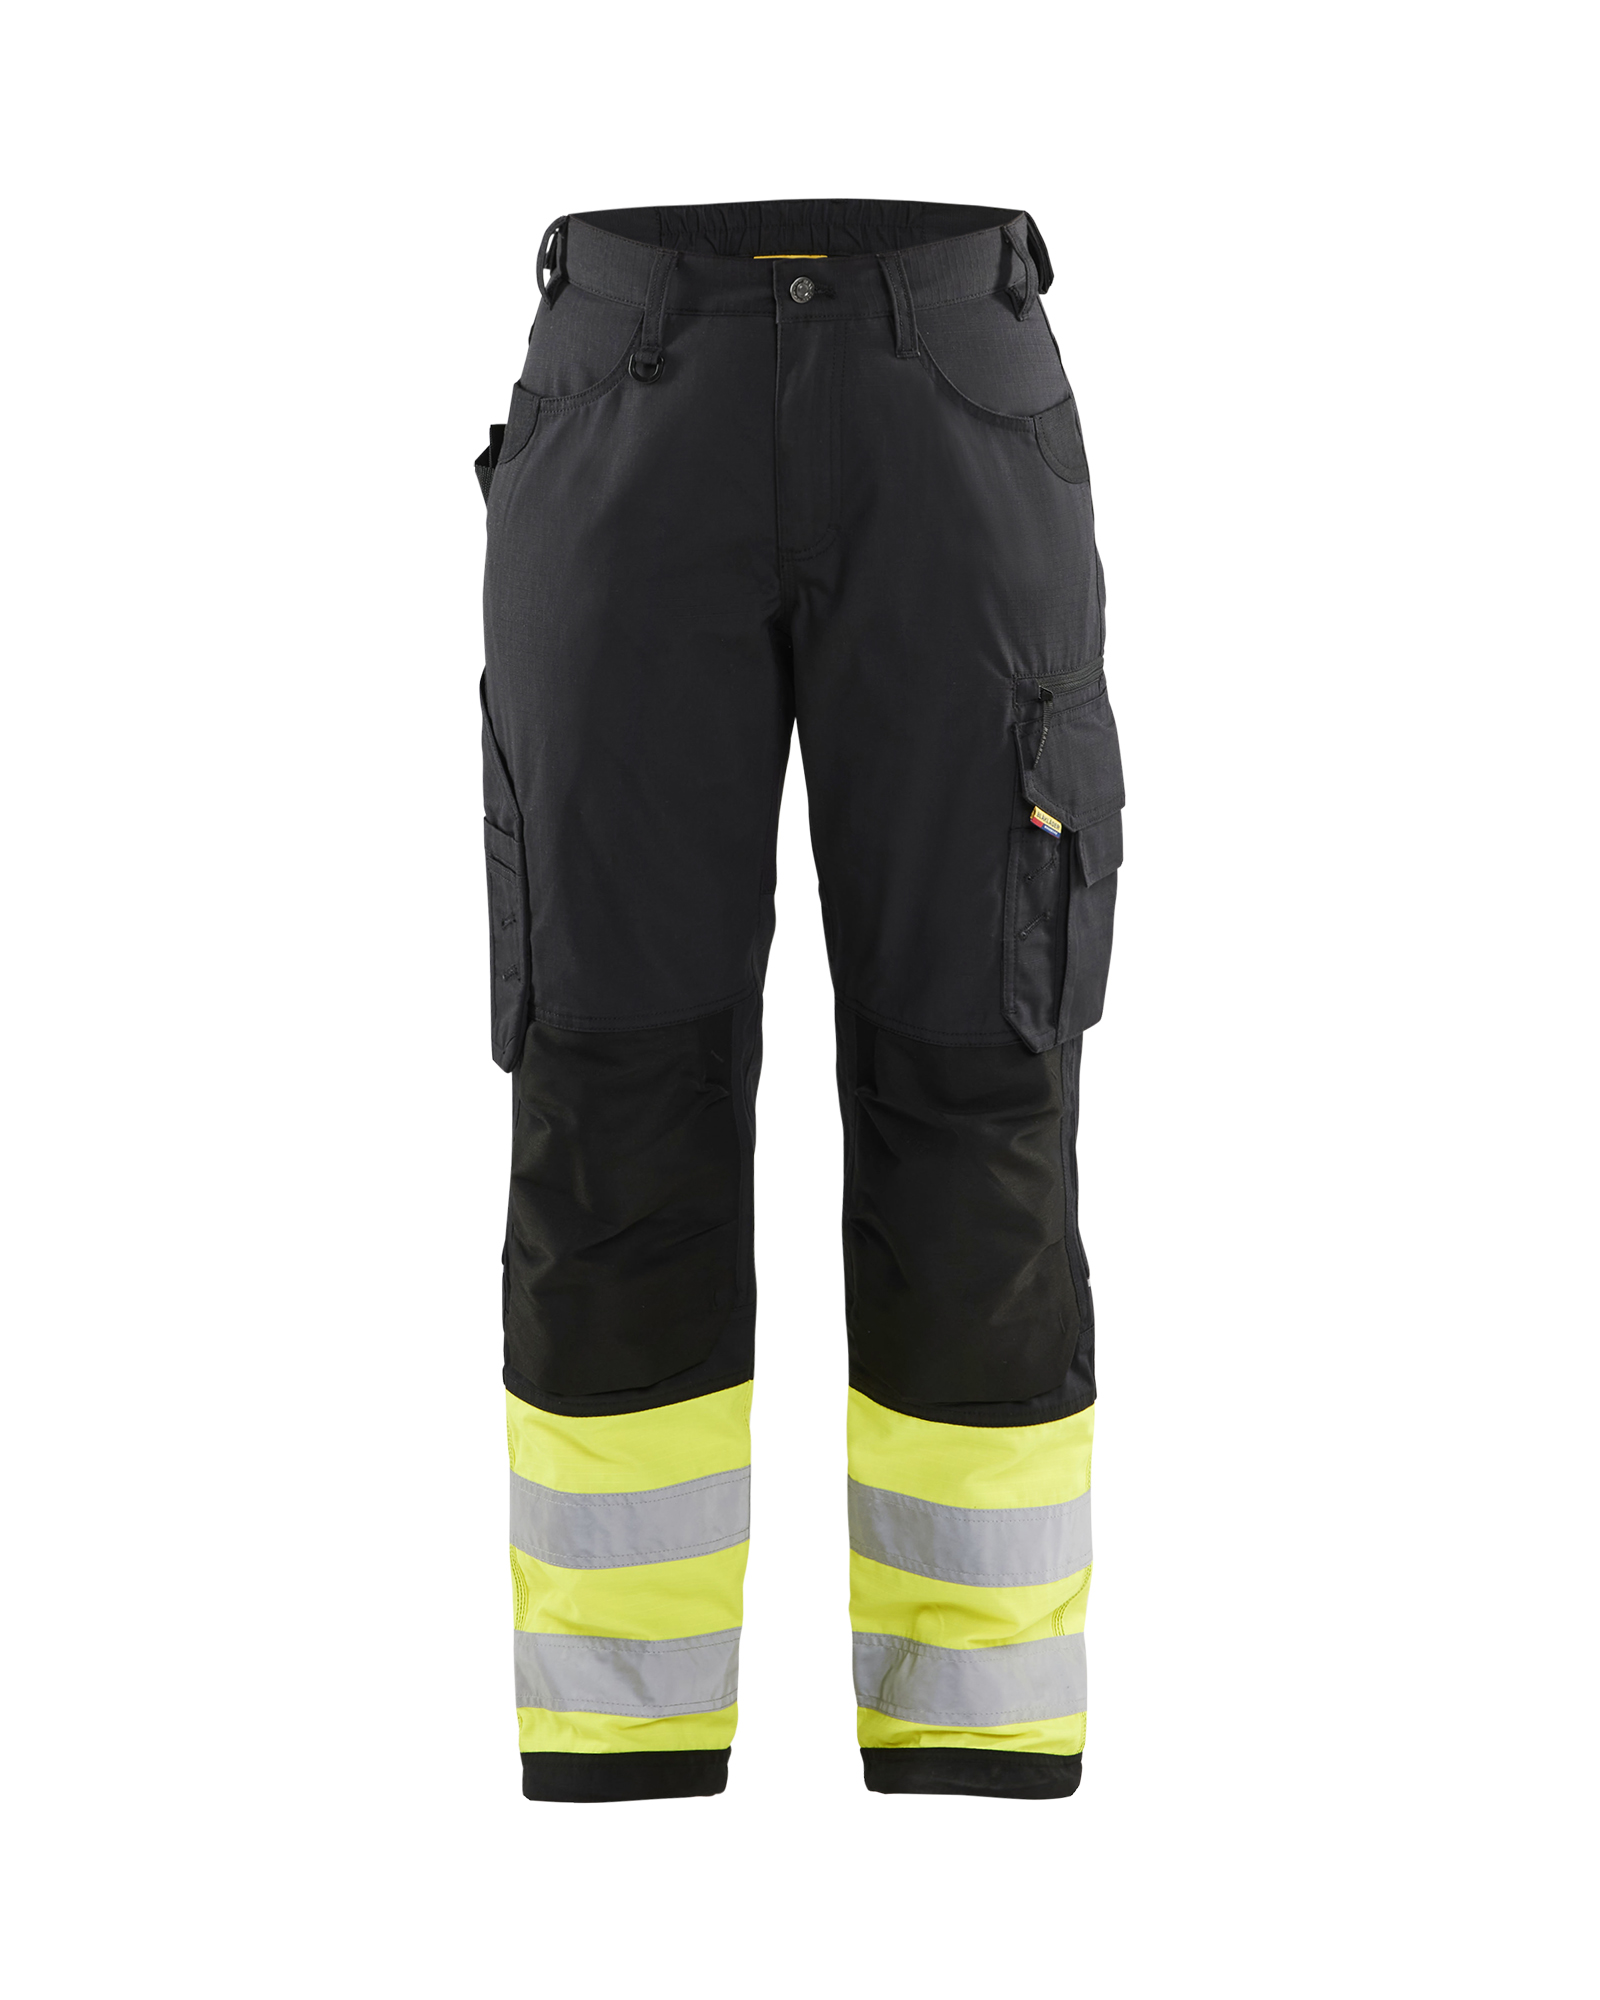 Women's Visibility Ripstop Pant